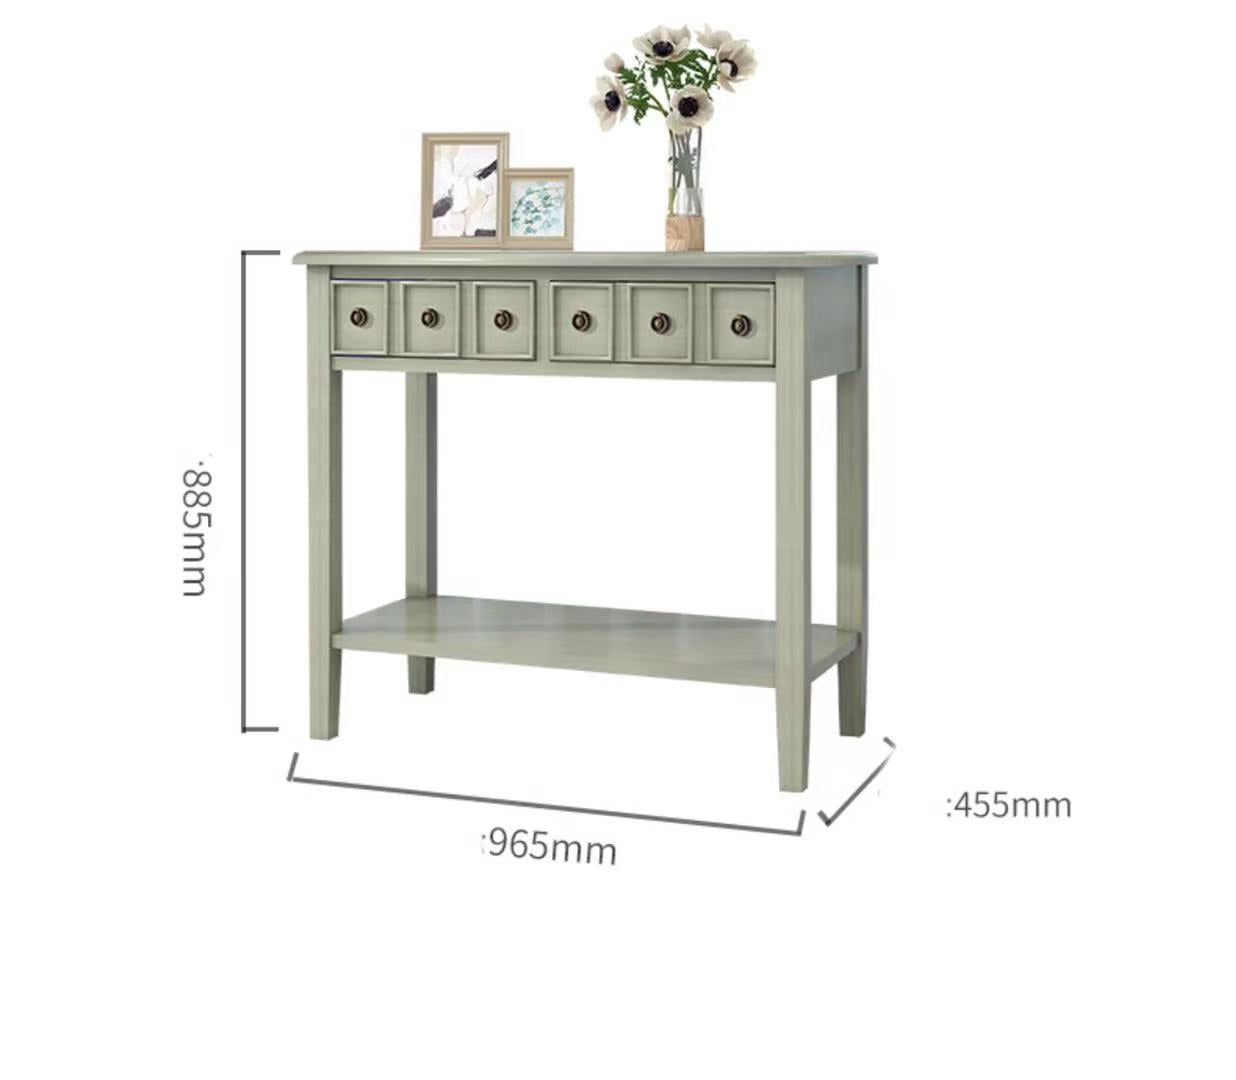 Mint Console Table With Drawers - 4 Seasons Home Gadgets